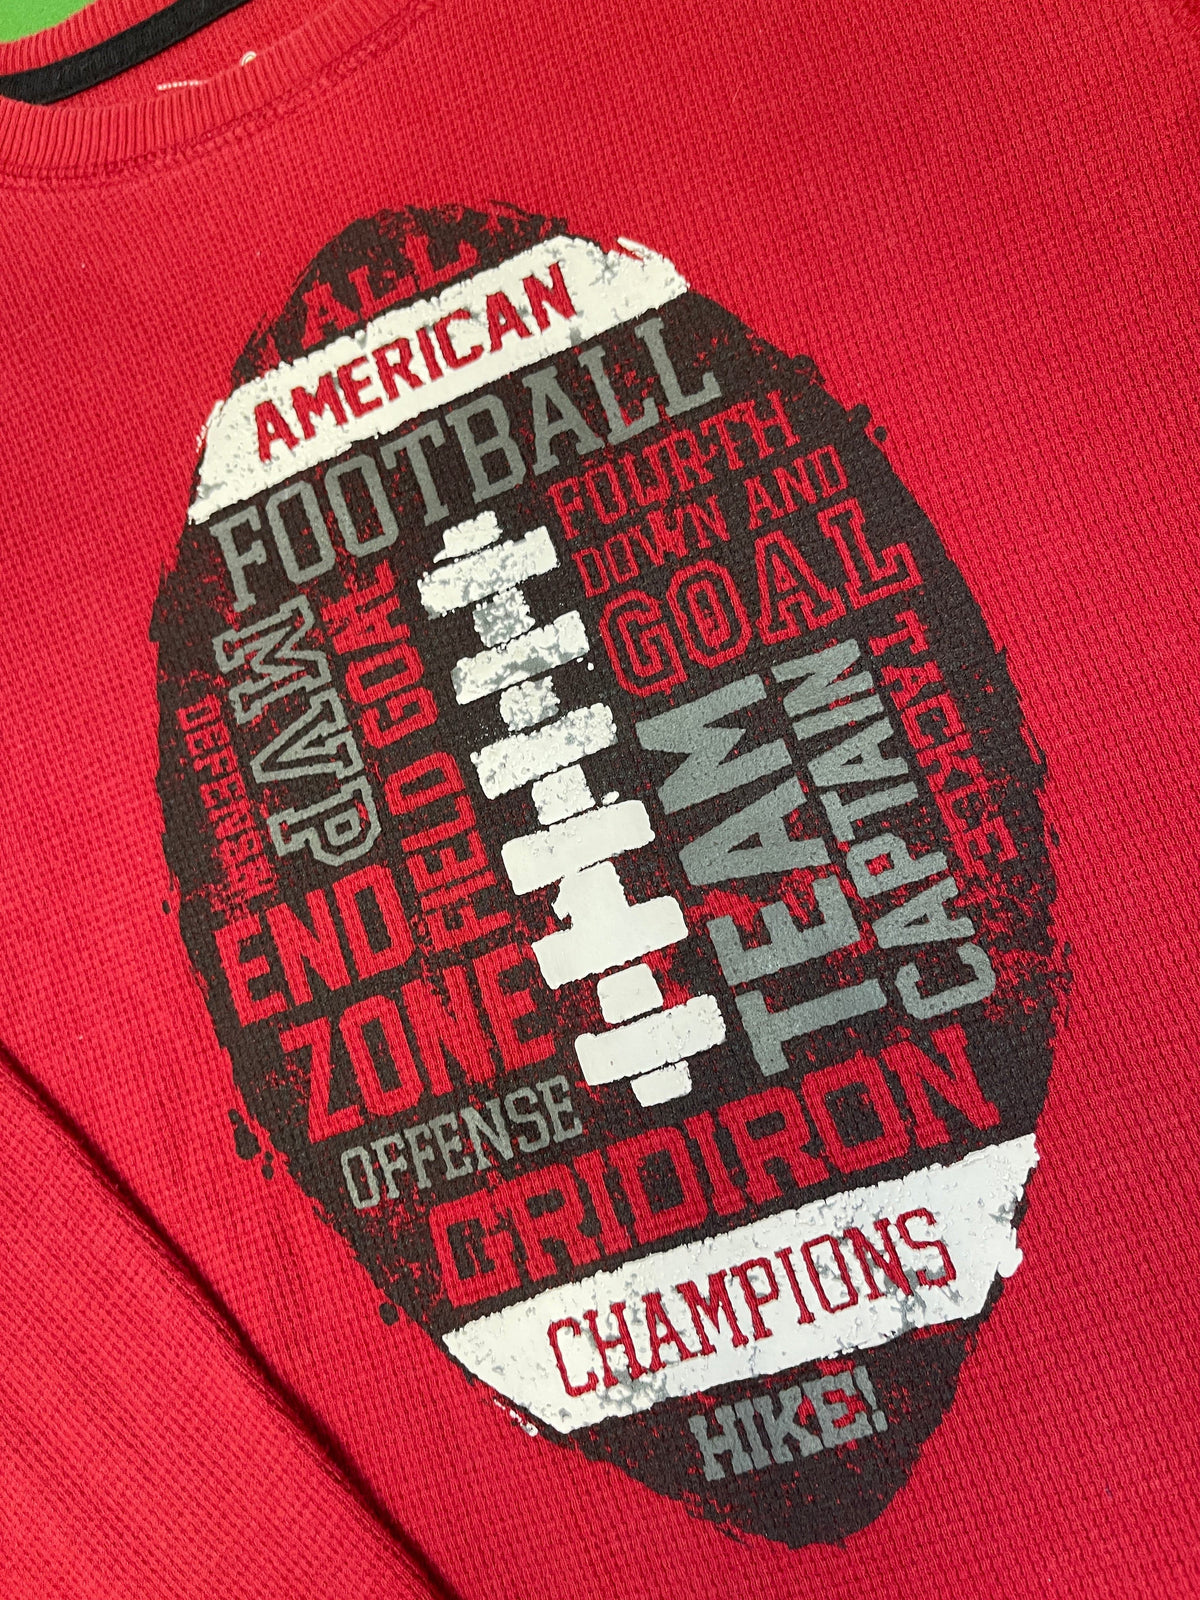 American Football Textured Red L/S T-Shirt Youth Small 7